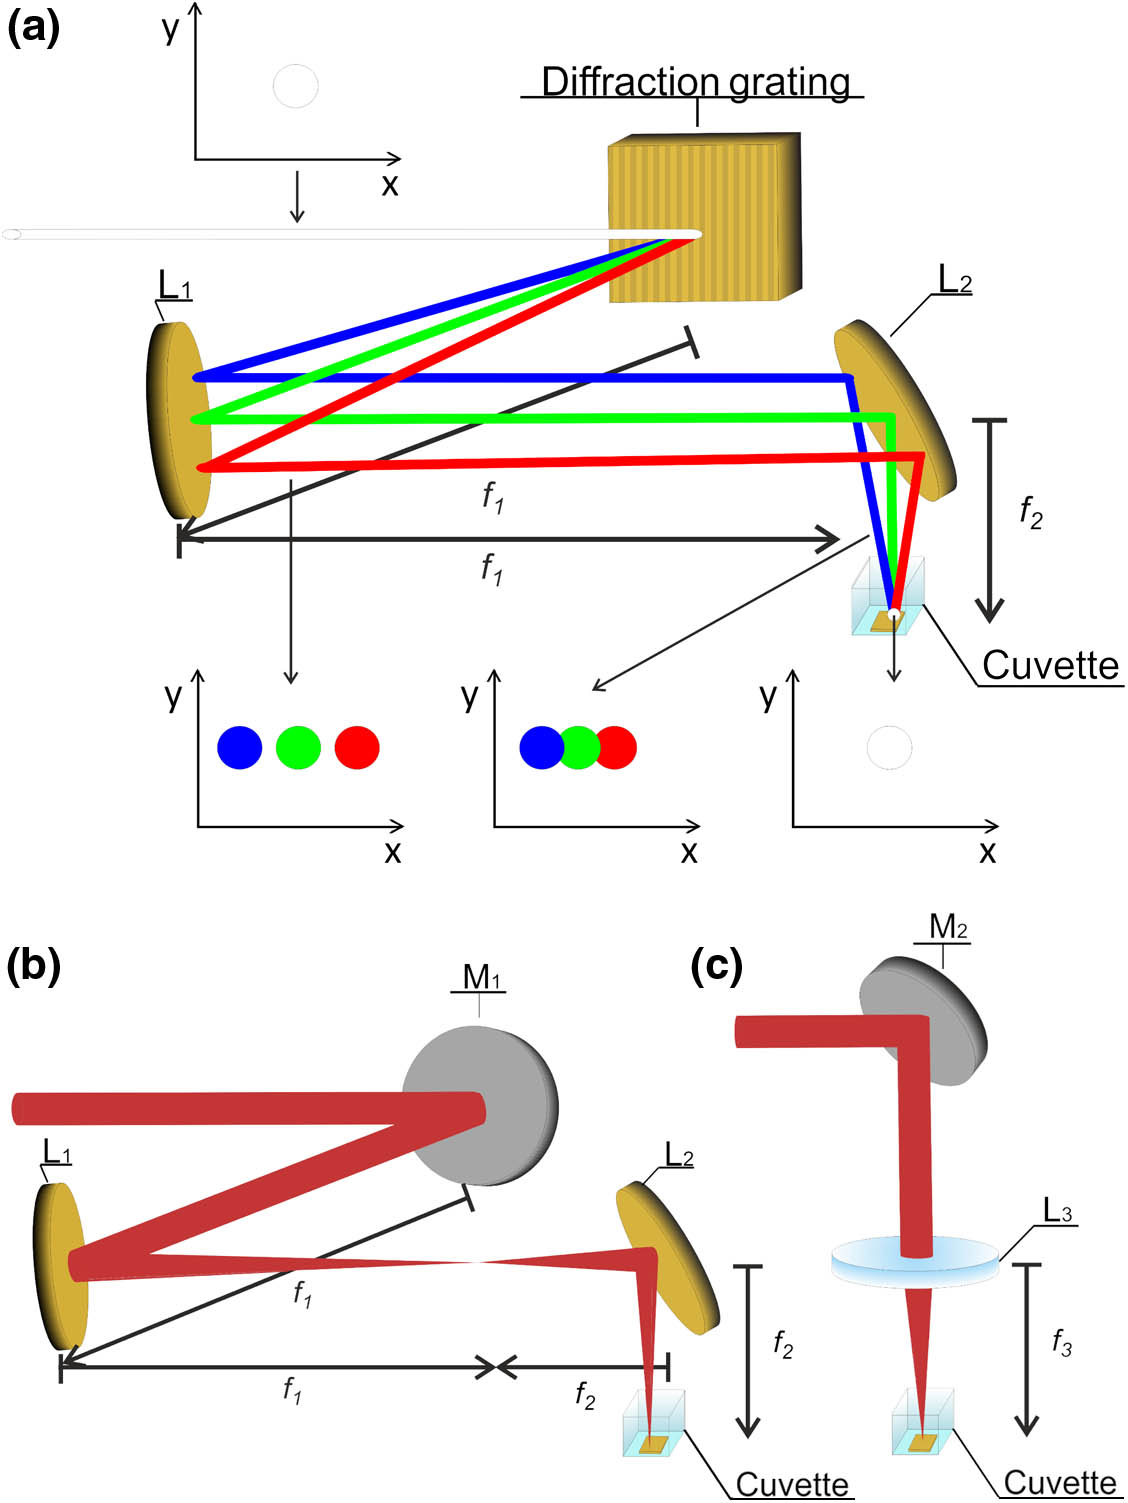 Schemes of the experimental setups employed to fabricate and compare gold nanoparticle production. (a) Image-based SSTF system based on a diffraction grating that spatially separates the broad 30 fs laser spectrum schematically displayed as red, green, and blue. Two off-axis gold mirrors form an image of the grating’s surface and achieve spatial overlap of all the wavelengths at focal spot plane. (b) Analogous image system (IOS) without spatiotemporal focusing effect. (c) Standard laser ablation in liquids system (COS) based on direct focalization of the femtosecond laser onto the target’s surface.